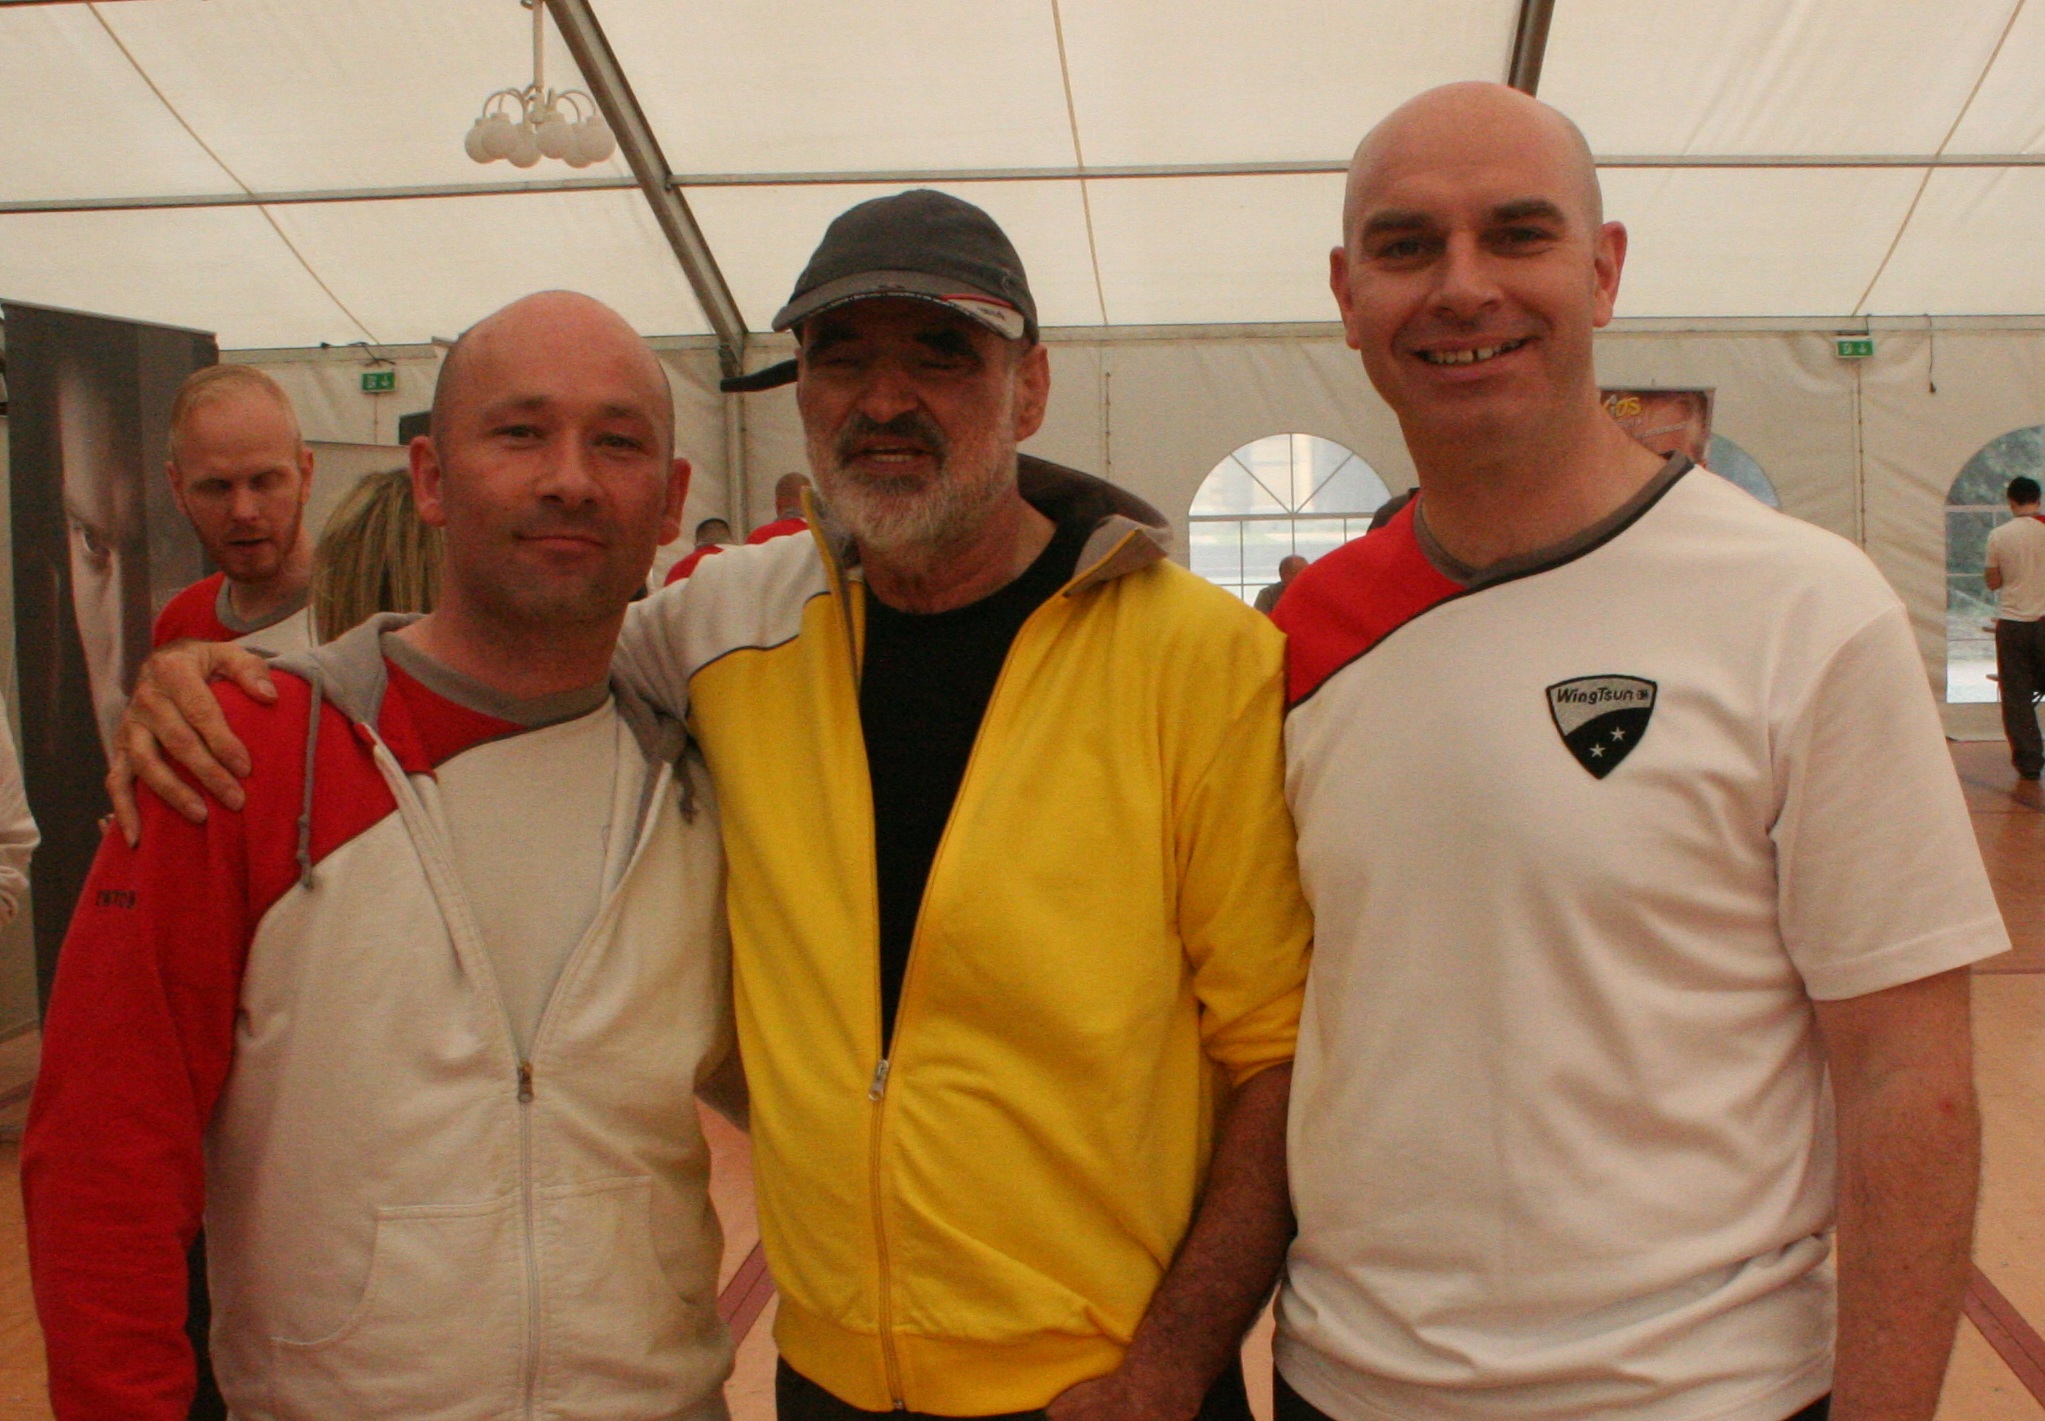 Rory Kelly, Si-Gung Keith Kernspecht and Daragh Breathnach